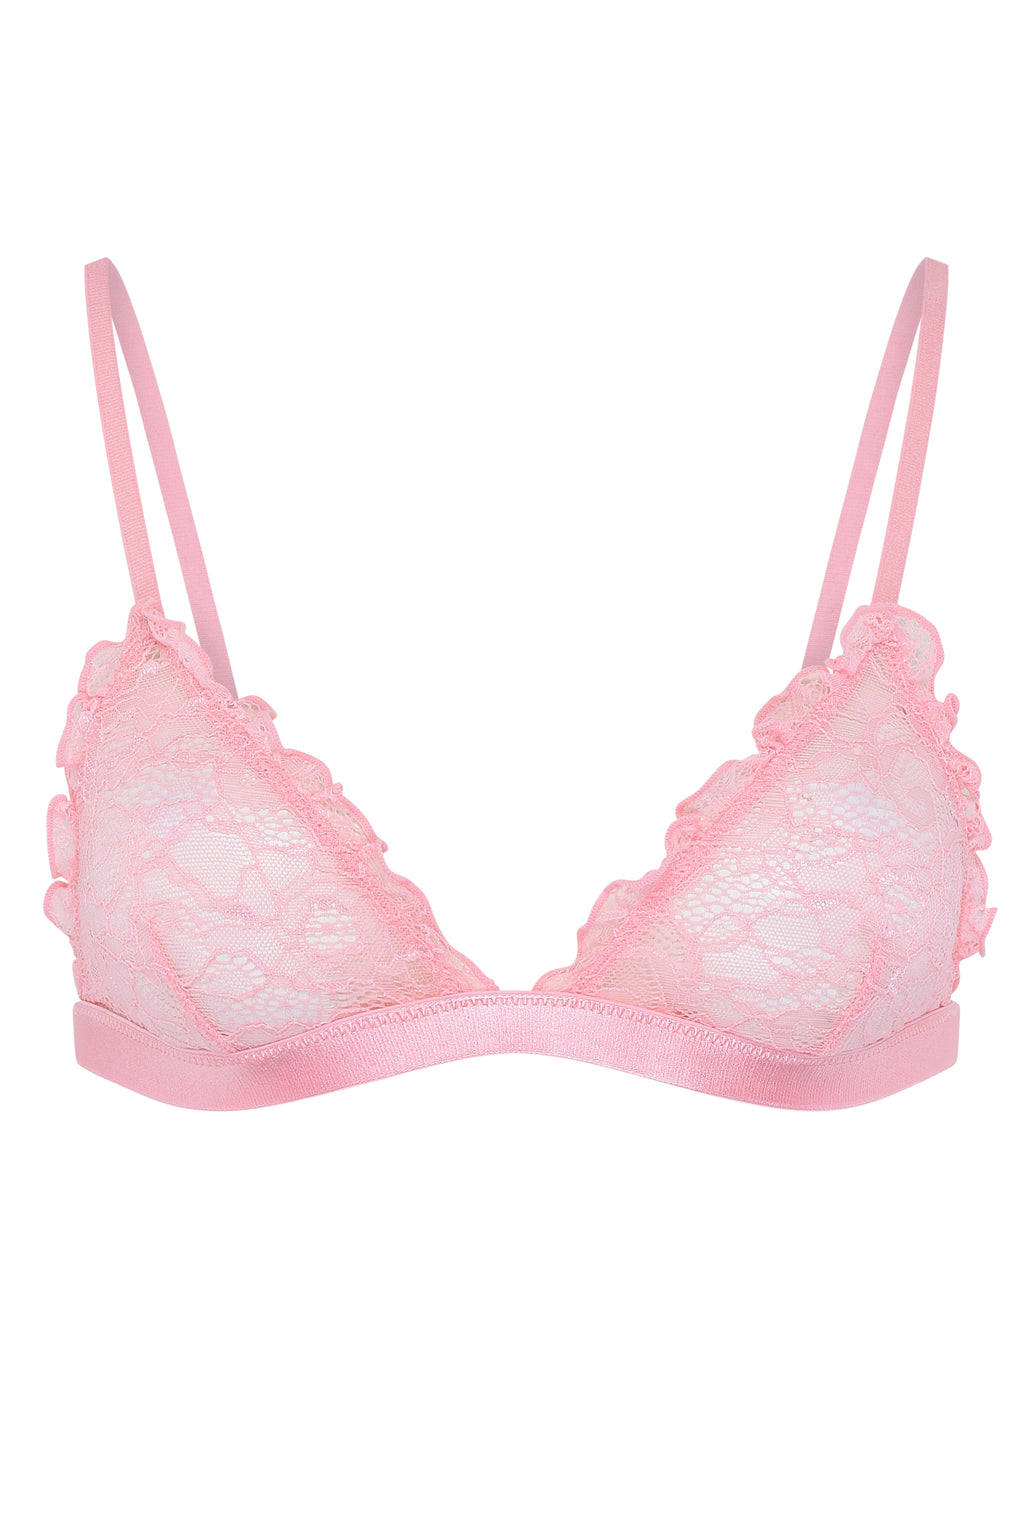 Louise Subtle Rosy Pink Push Up Bra With Removable Straps and